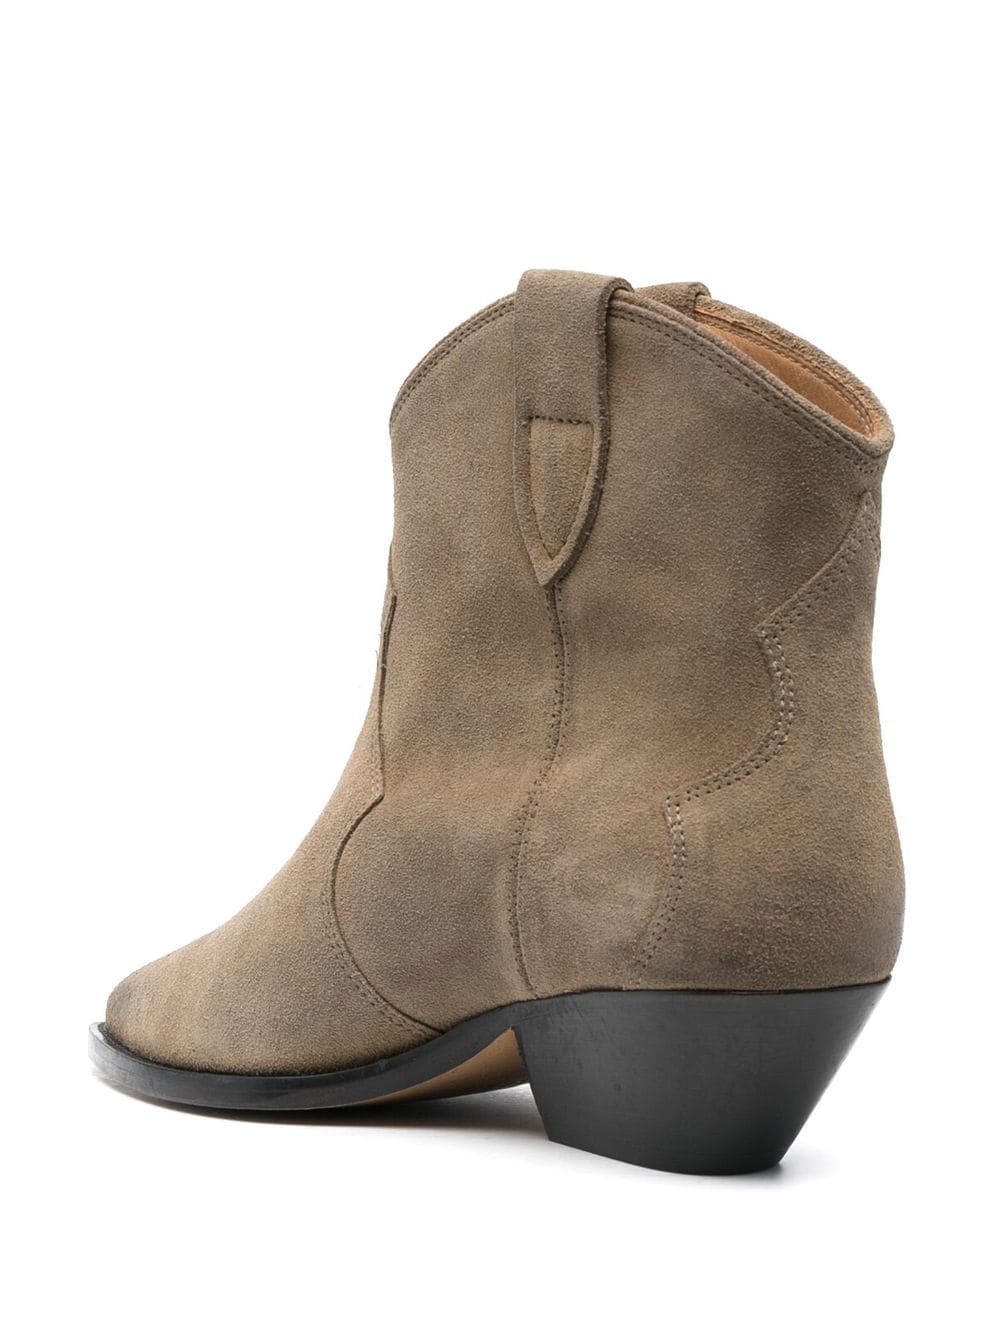 DEWINA boots, taupe